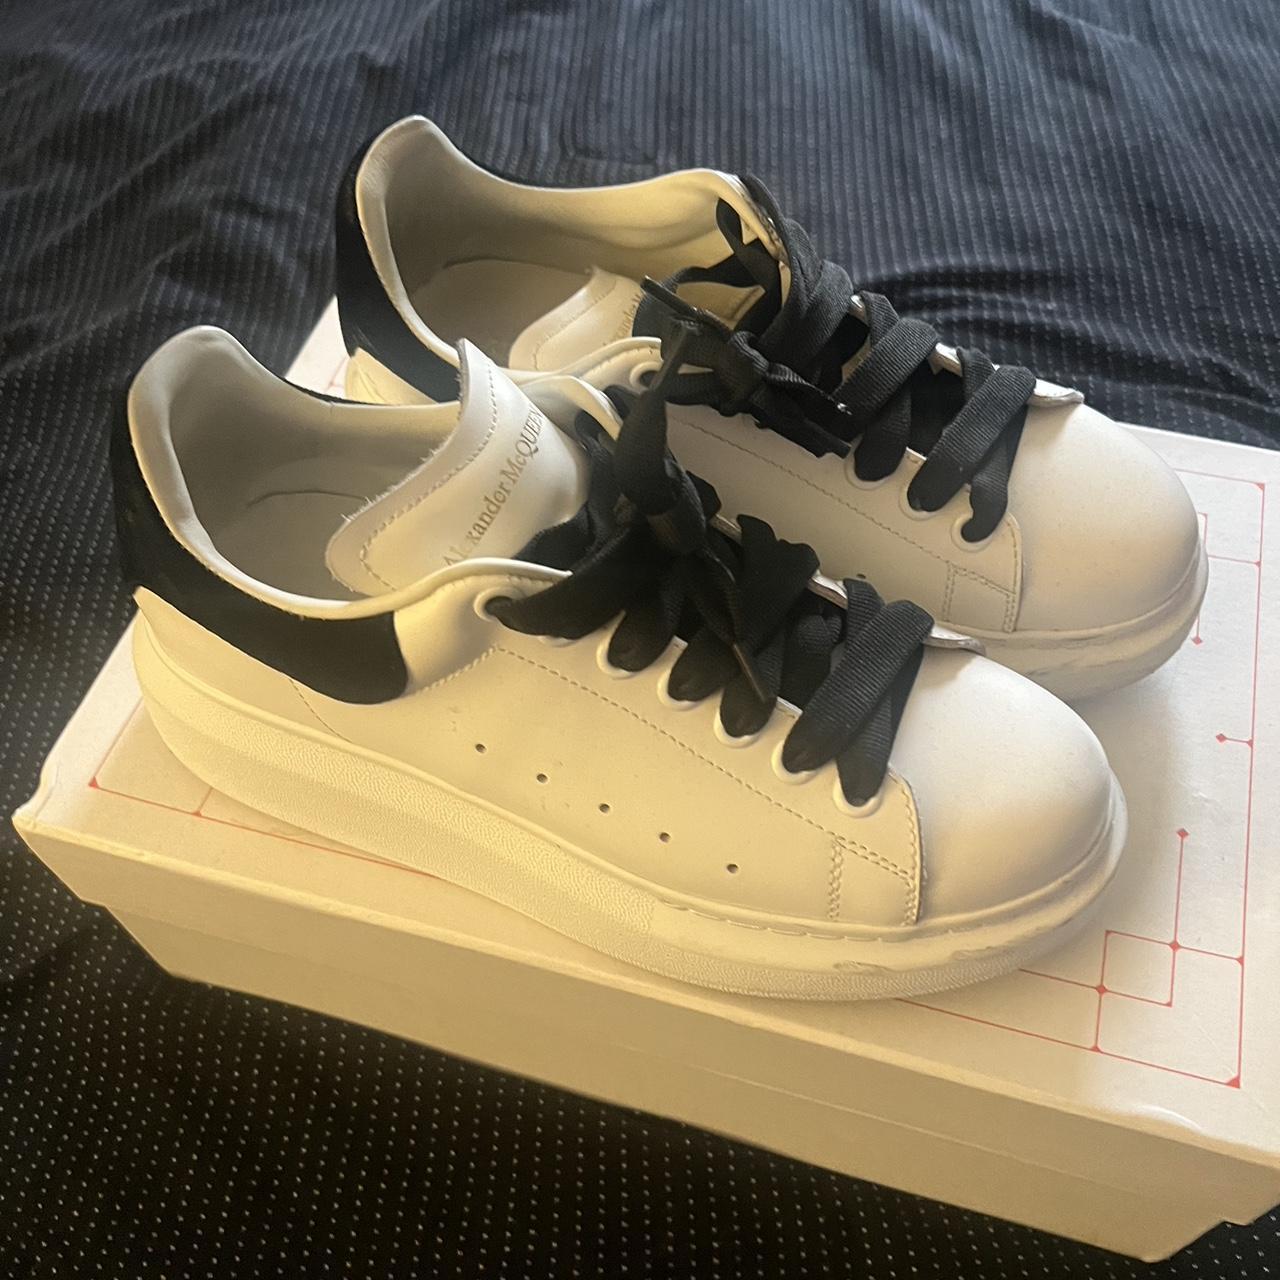 Alexander McQueen sneakers also comes with the... - Depop